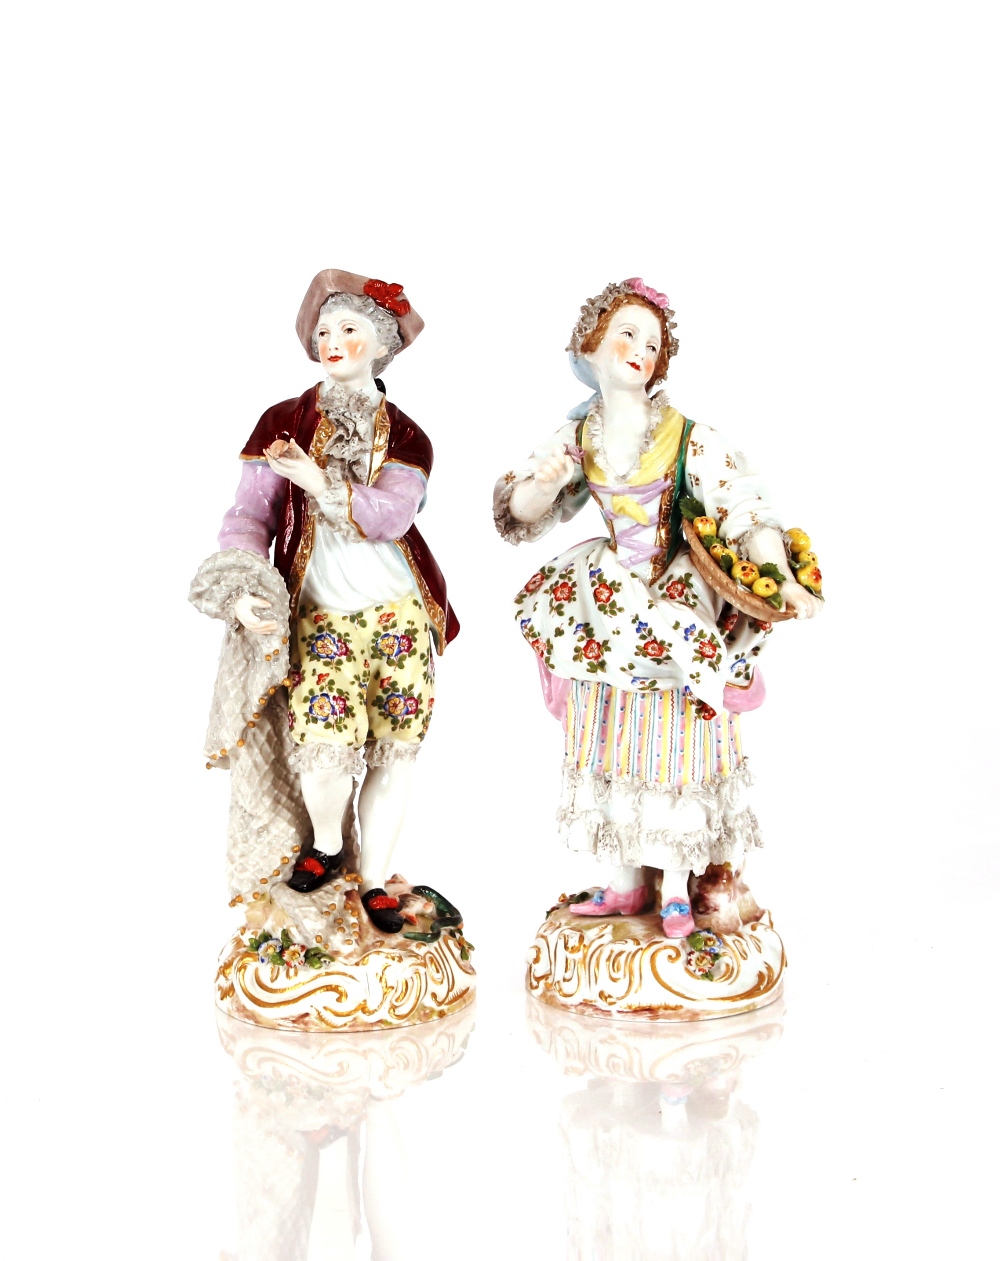 A pair of 19th Century German porcelain figures, depicting street vendors in brightly coloured